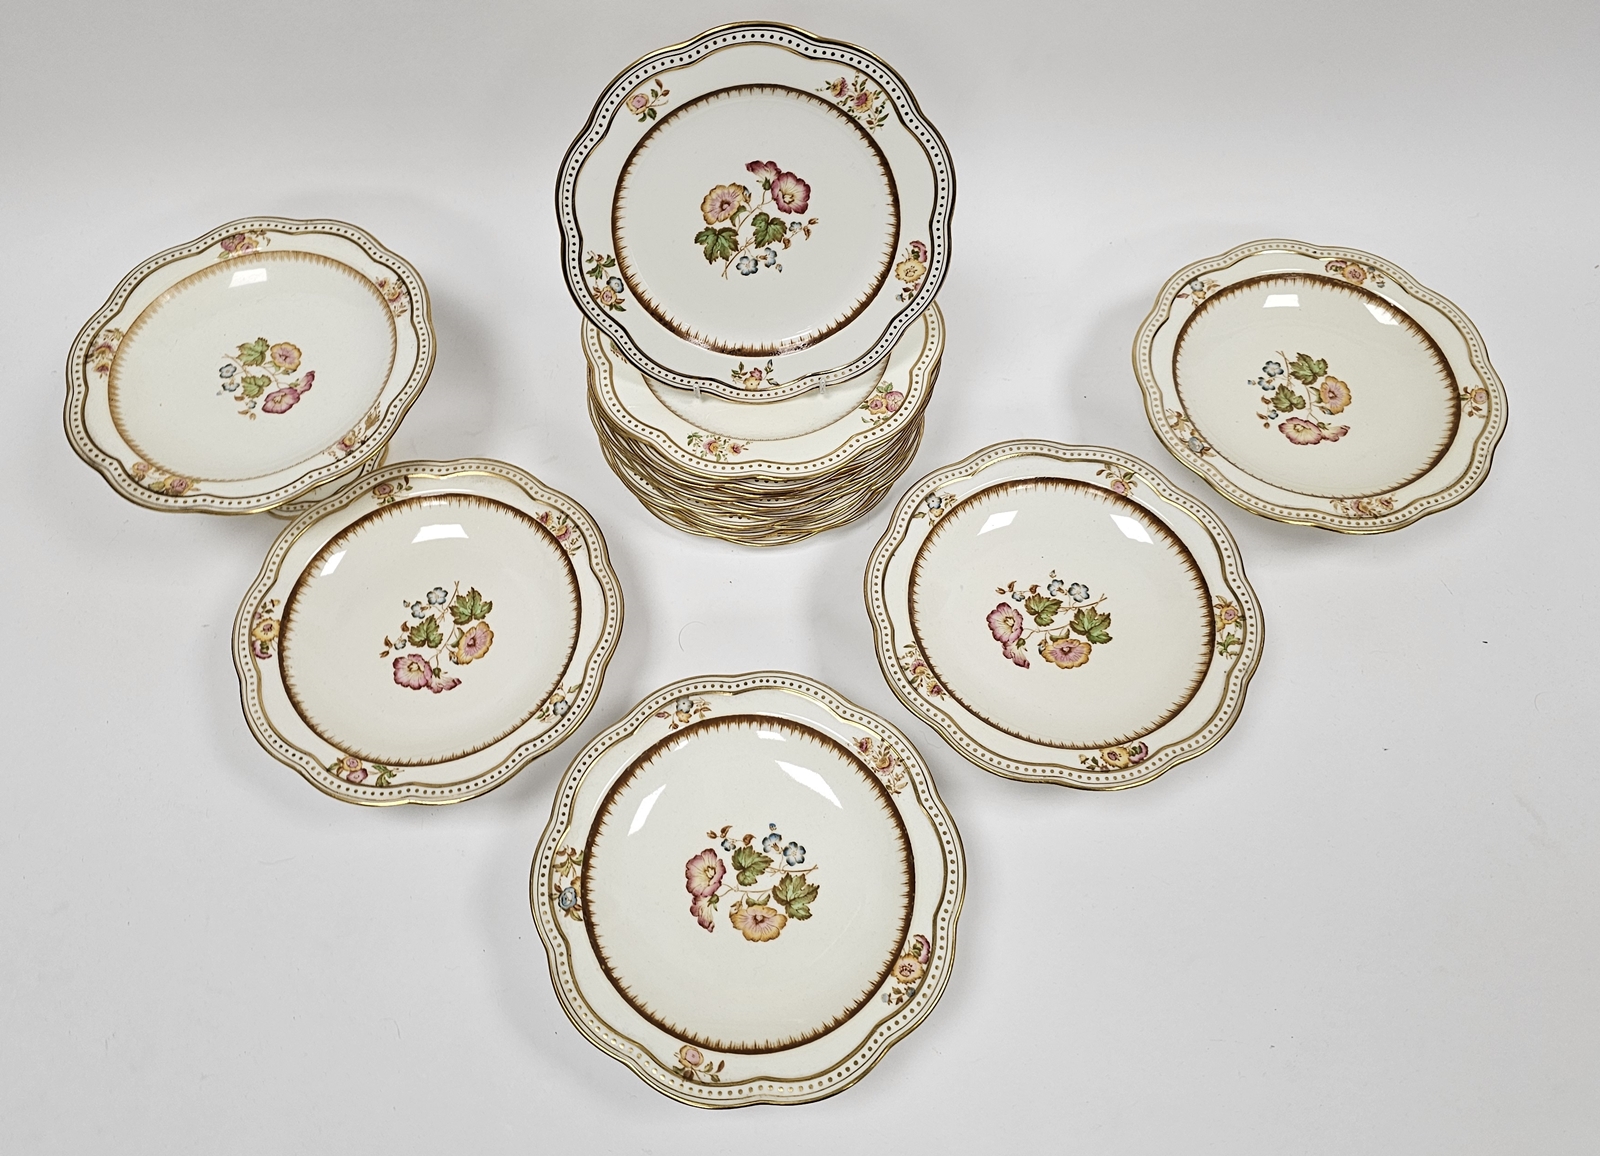 Wedgwood bone china part dessert service, late 19th century, printed black and impressed marks, - Image 2 of 3